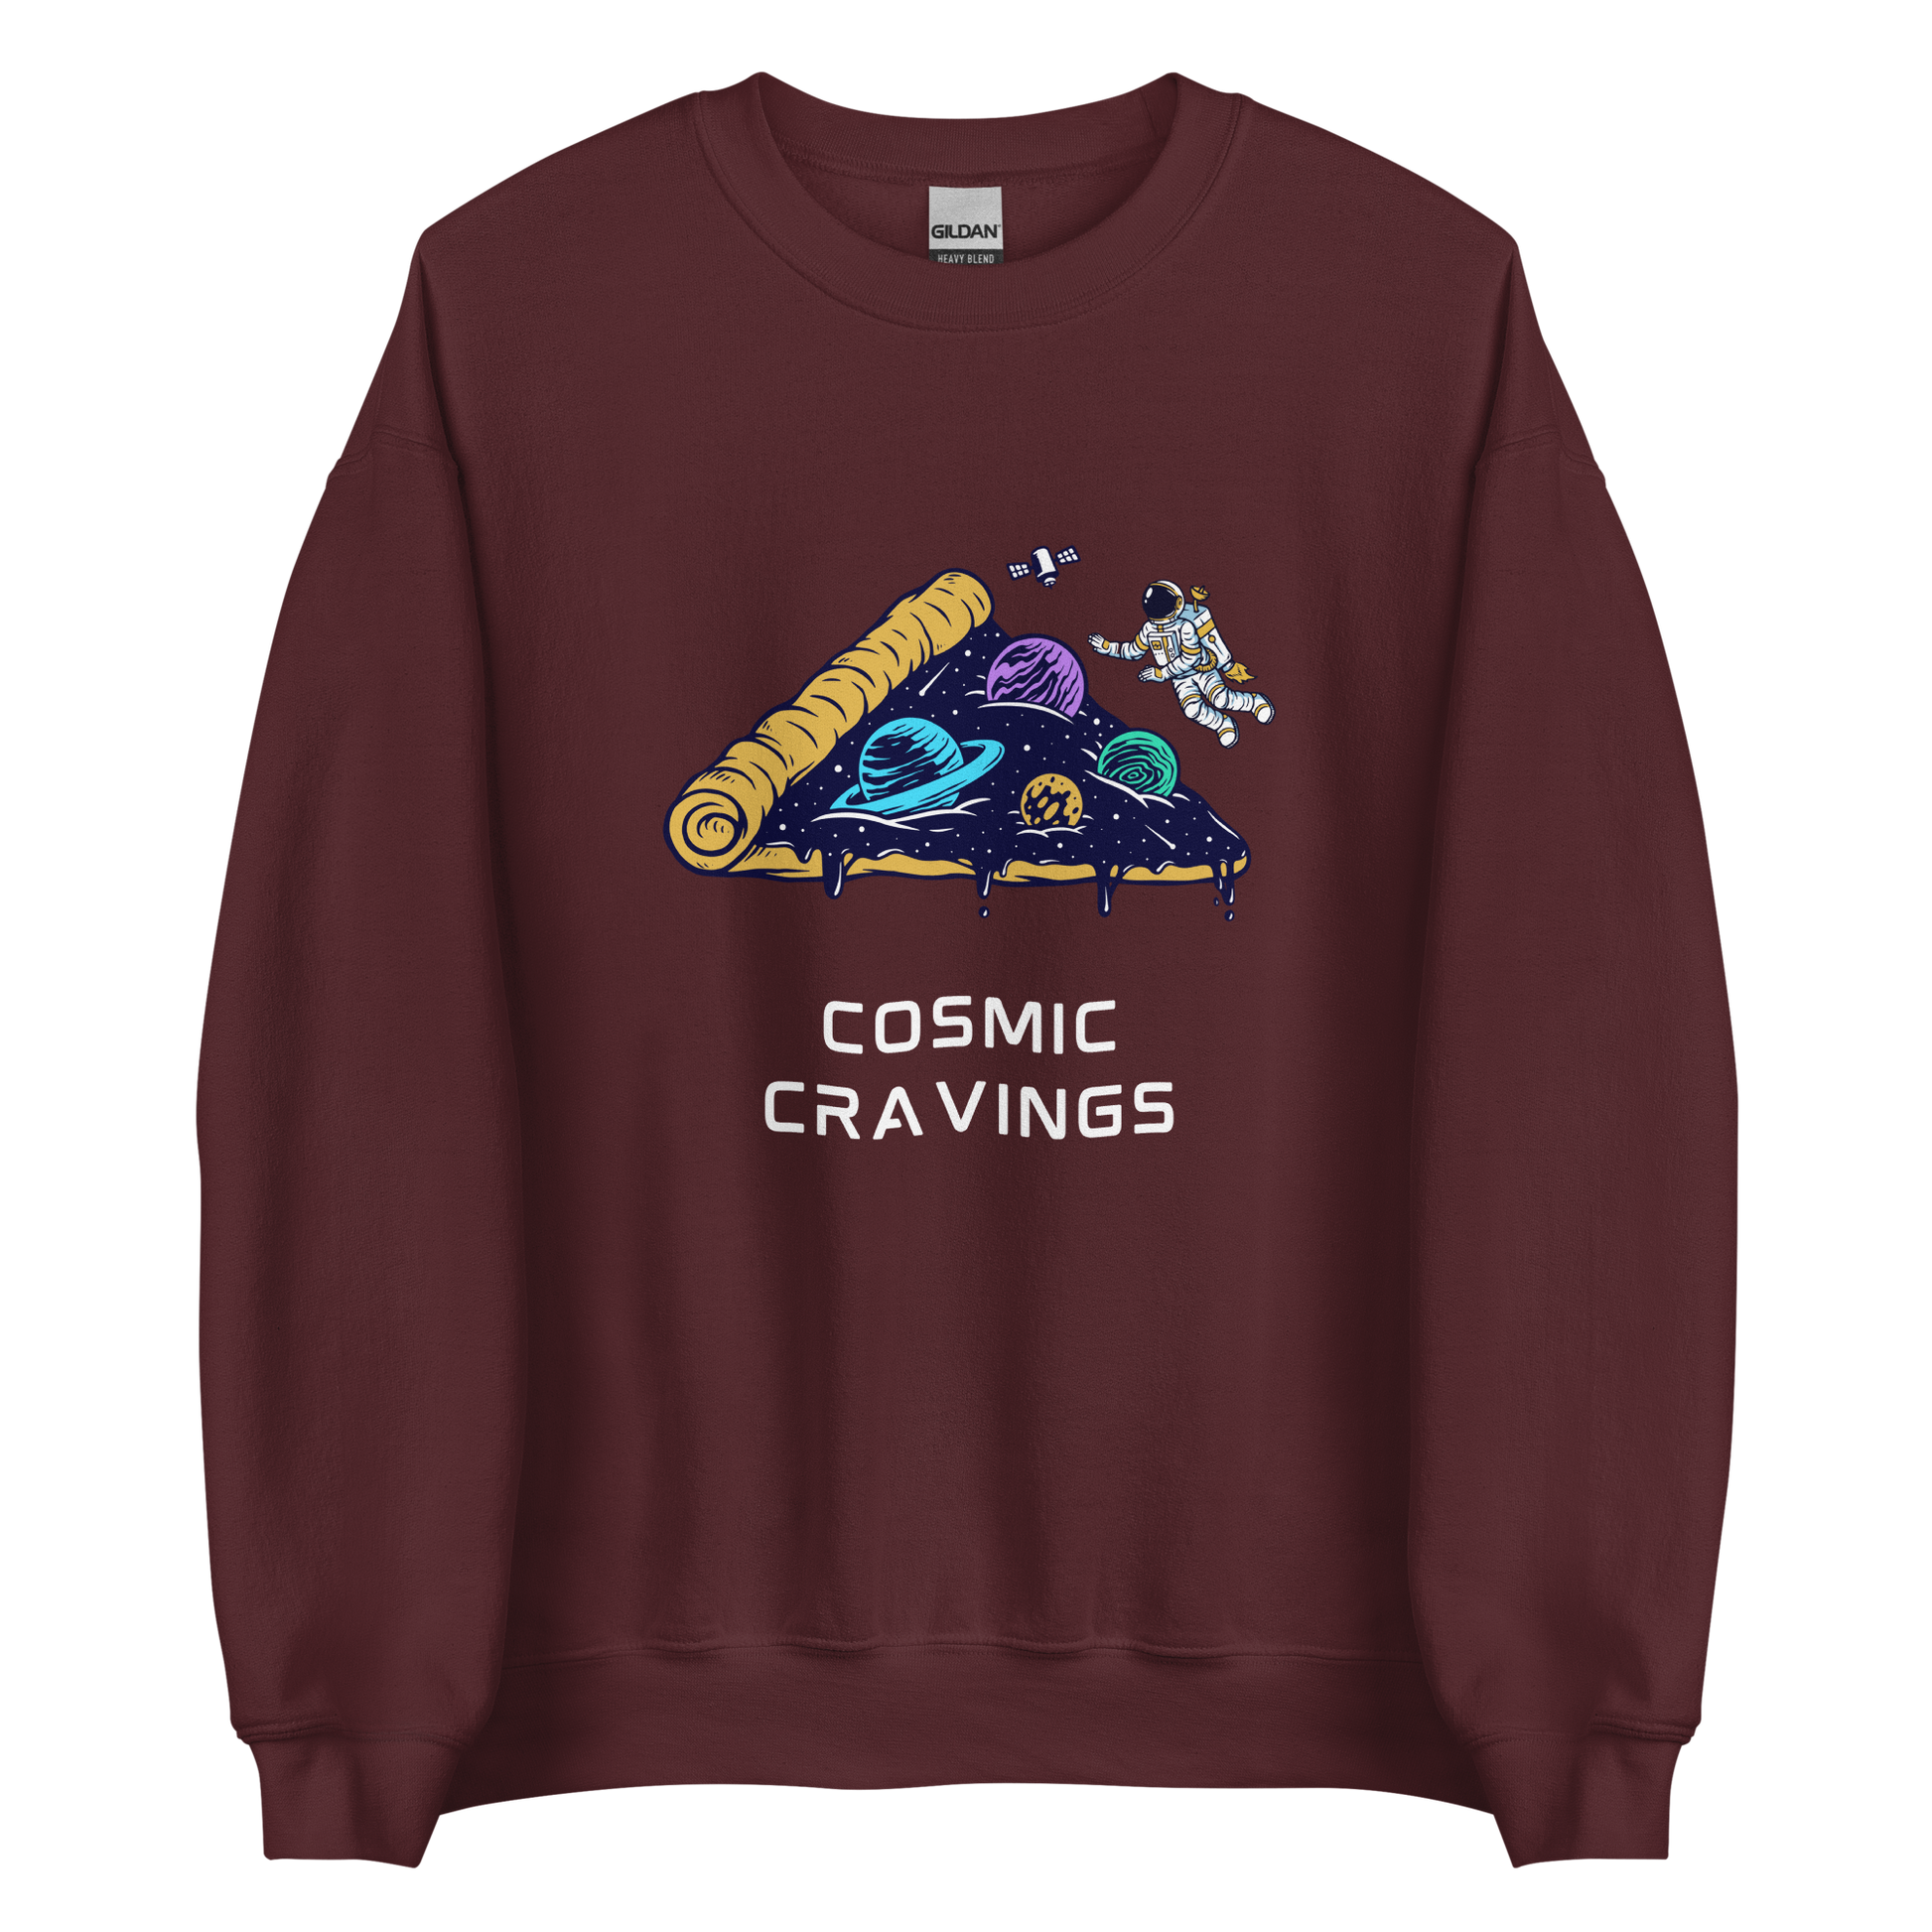 Maroon Cosmic Cravings Sweatshirt featuring an Astronaut Exploring a Pizza Universe graphic on the chest - Funny Graphic Space Sweatshirts - Boozy Fox